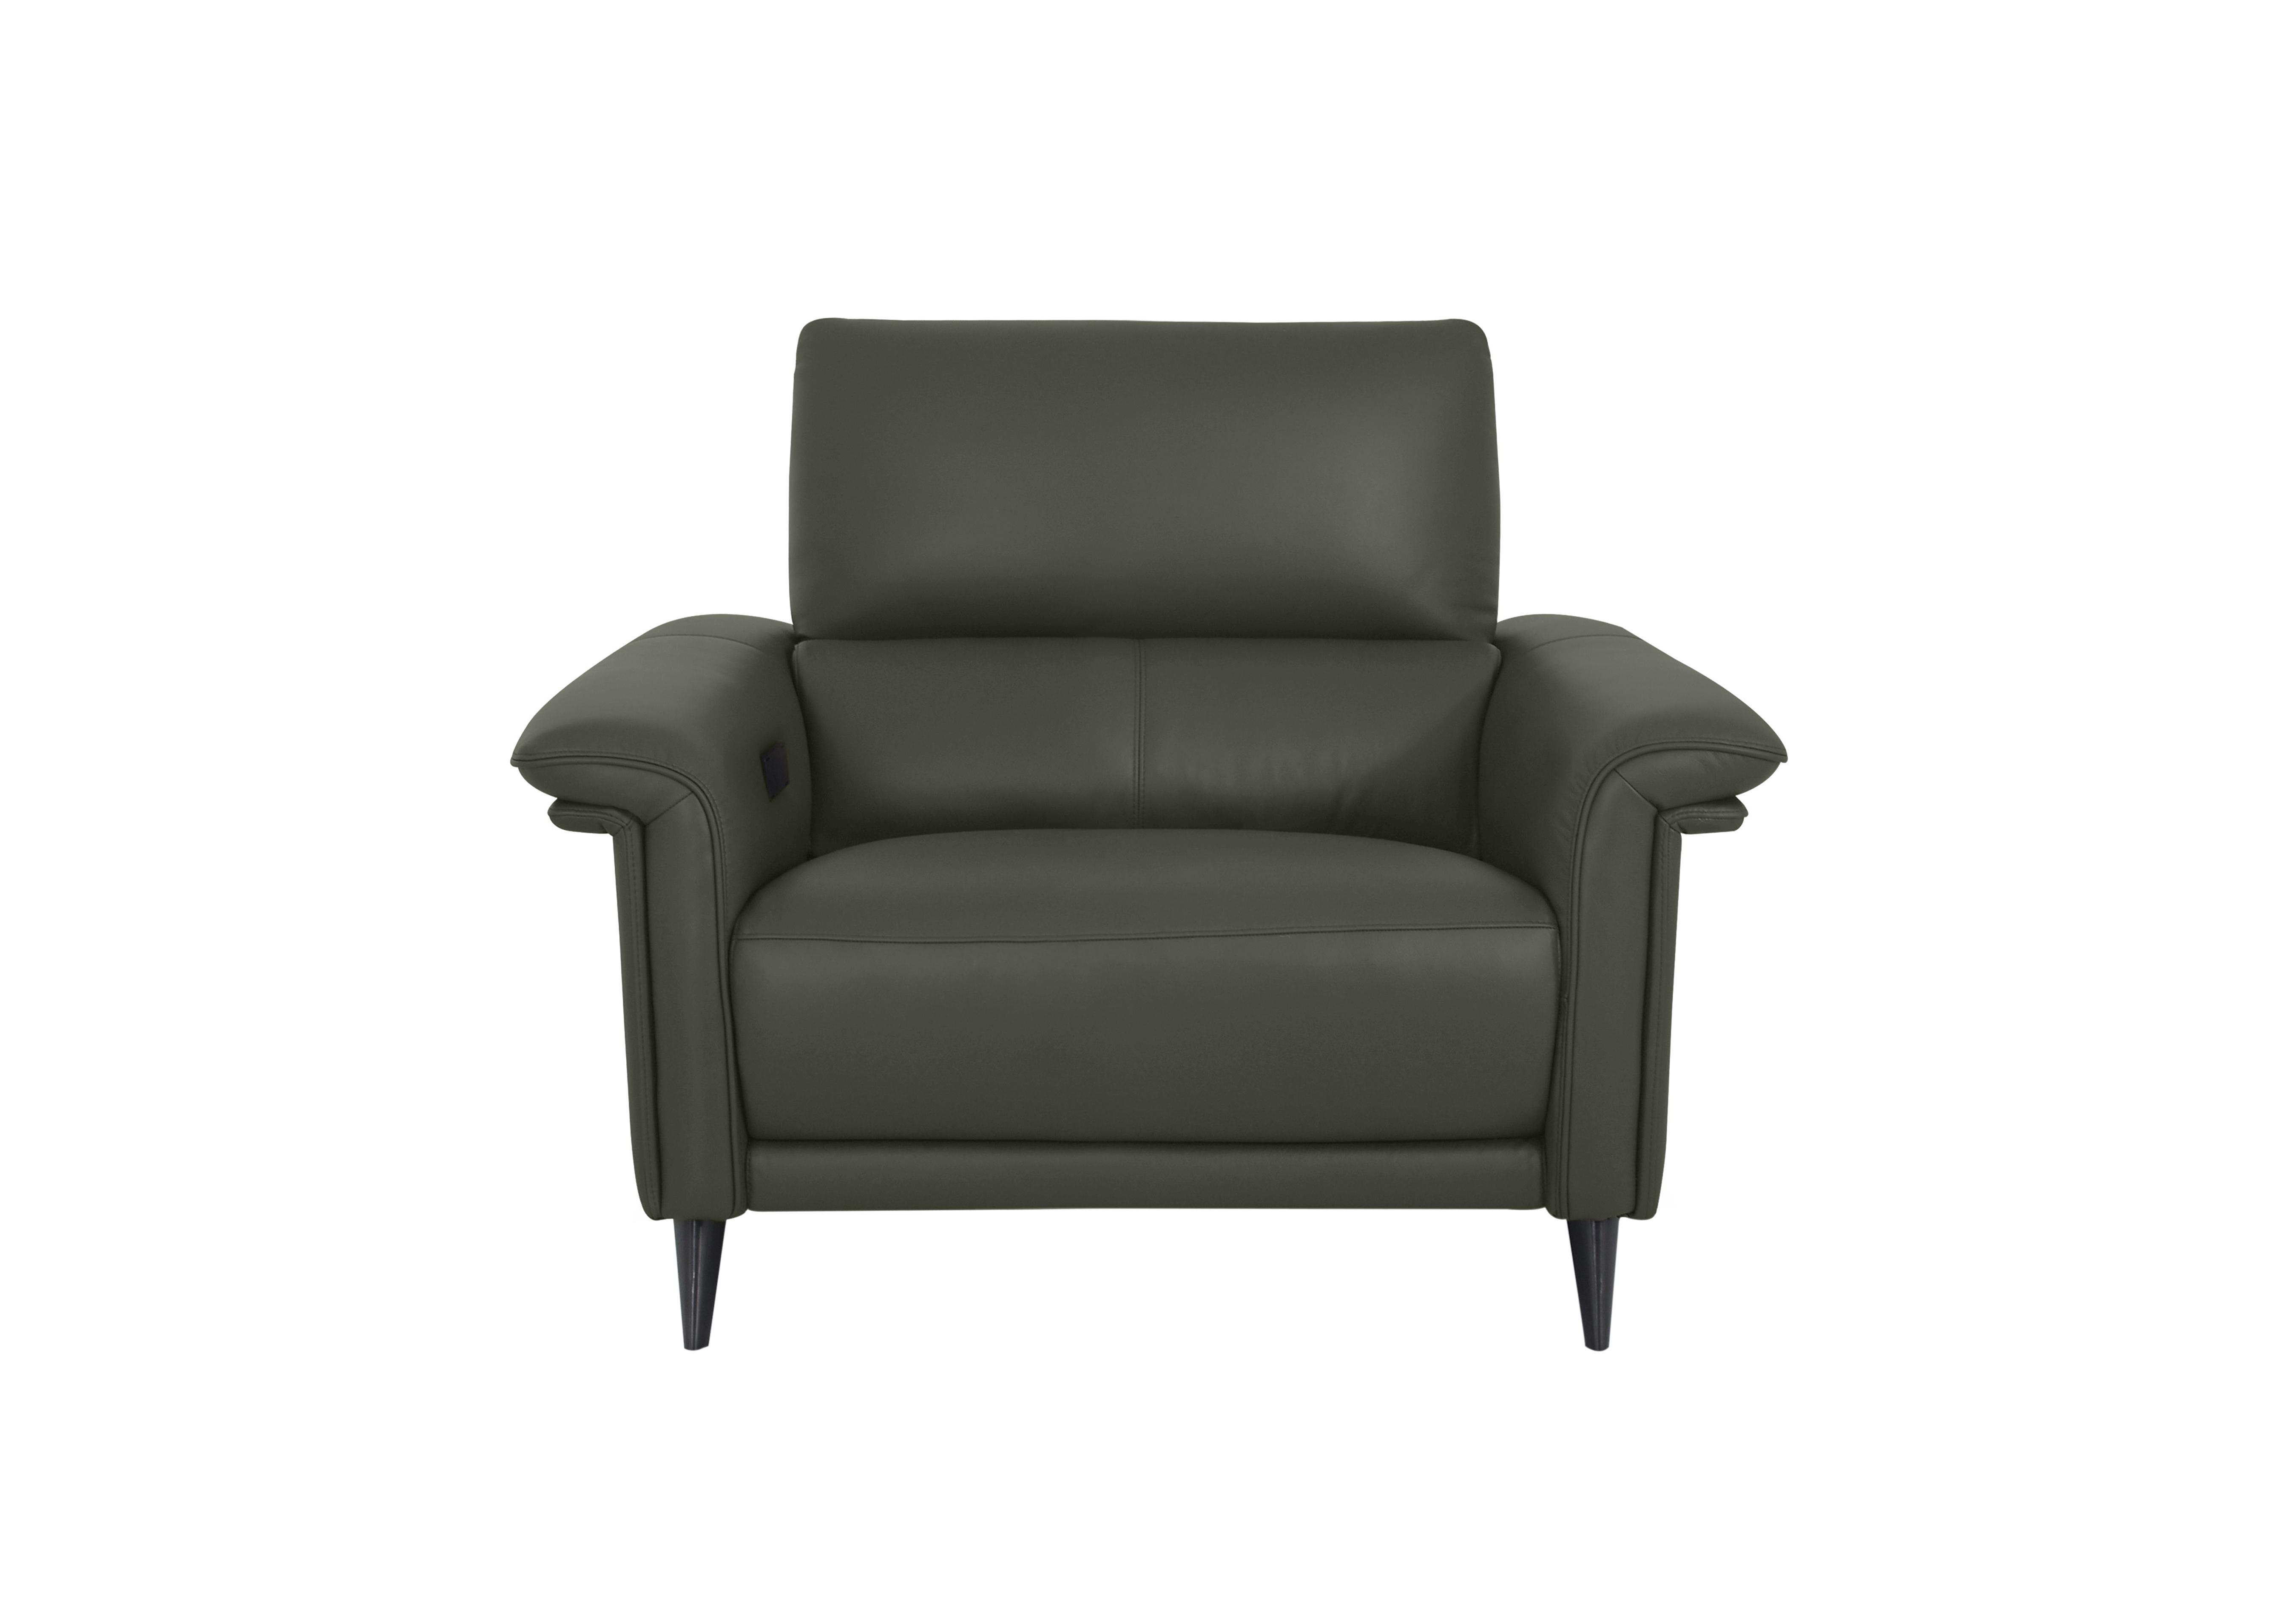 Huxley Leather Chair in Np-548e Dark Olive on Furniture Village